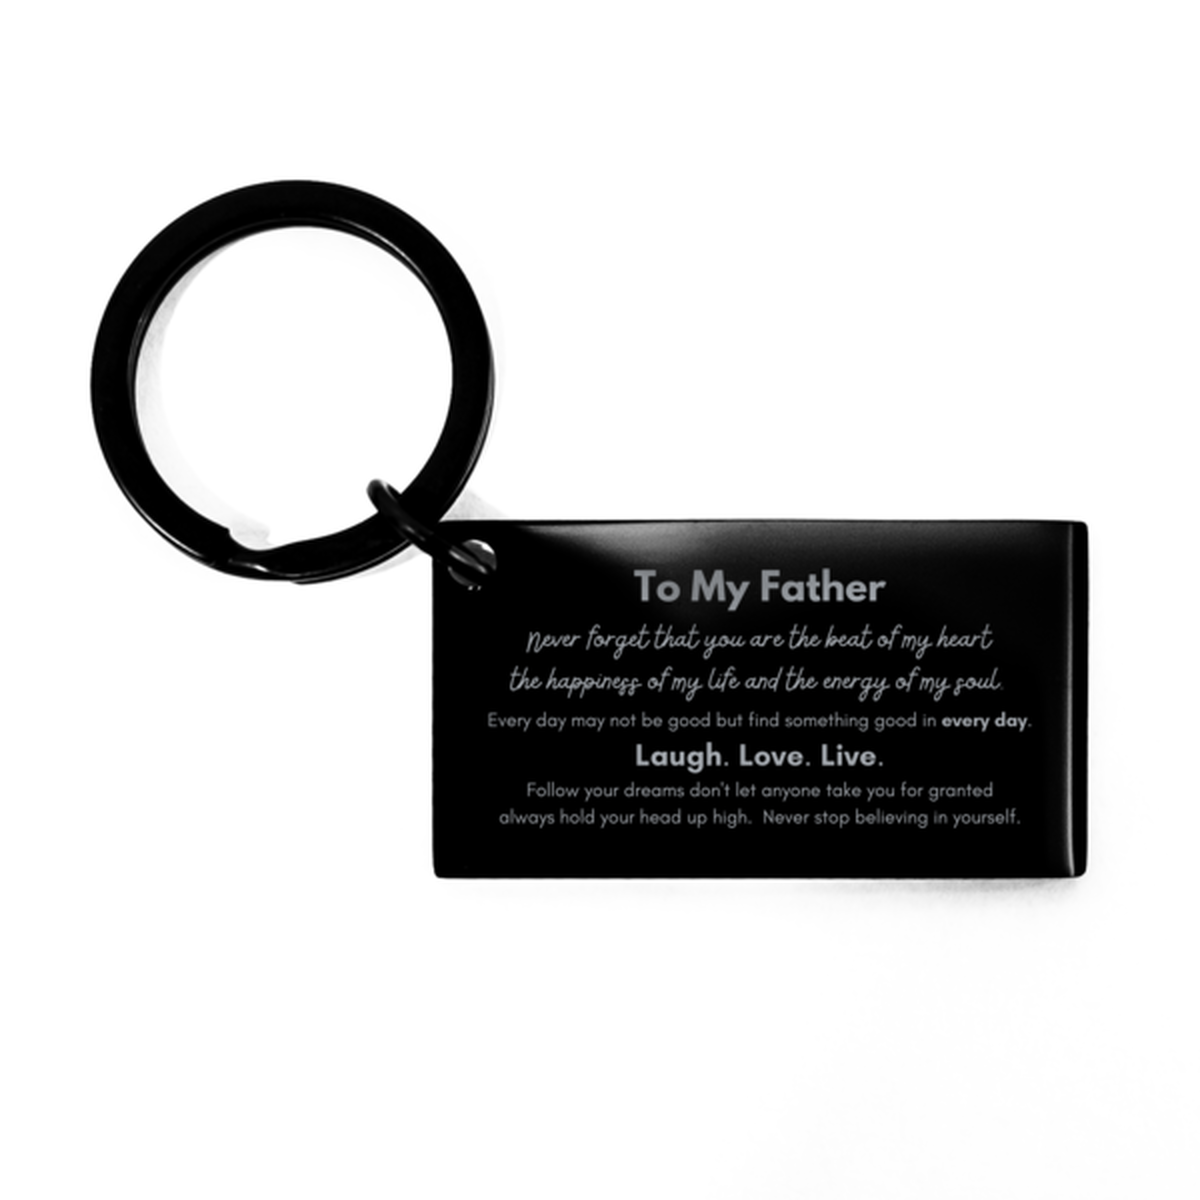 To My Father Keyring Gifts, Christmas Father Keychain Present, Birthday Unique Motivational For Father, To My Father Never forget that you are the beat of my heart the happiness of my life and the energy of my soul